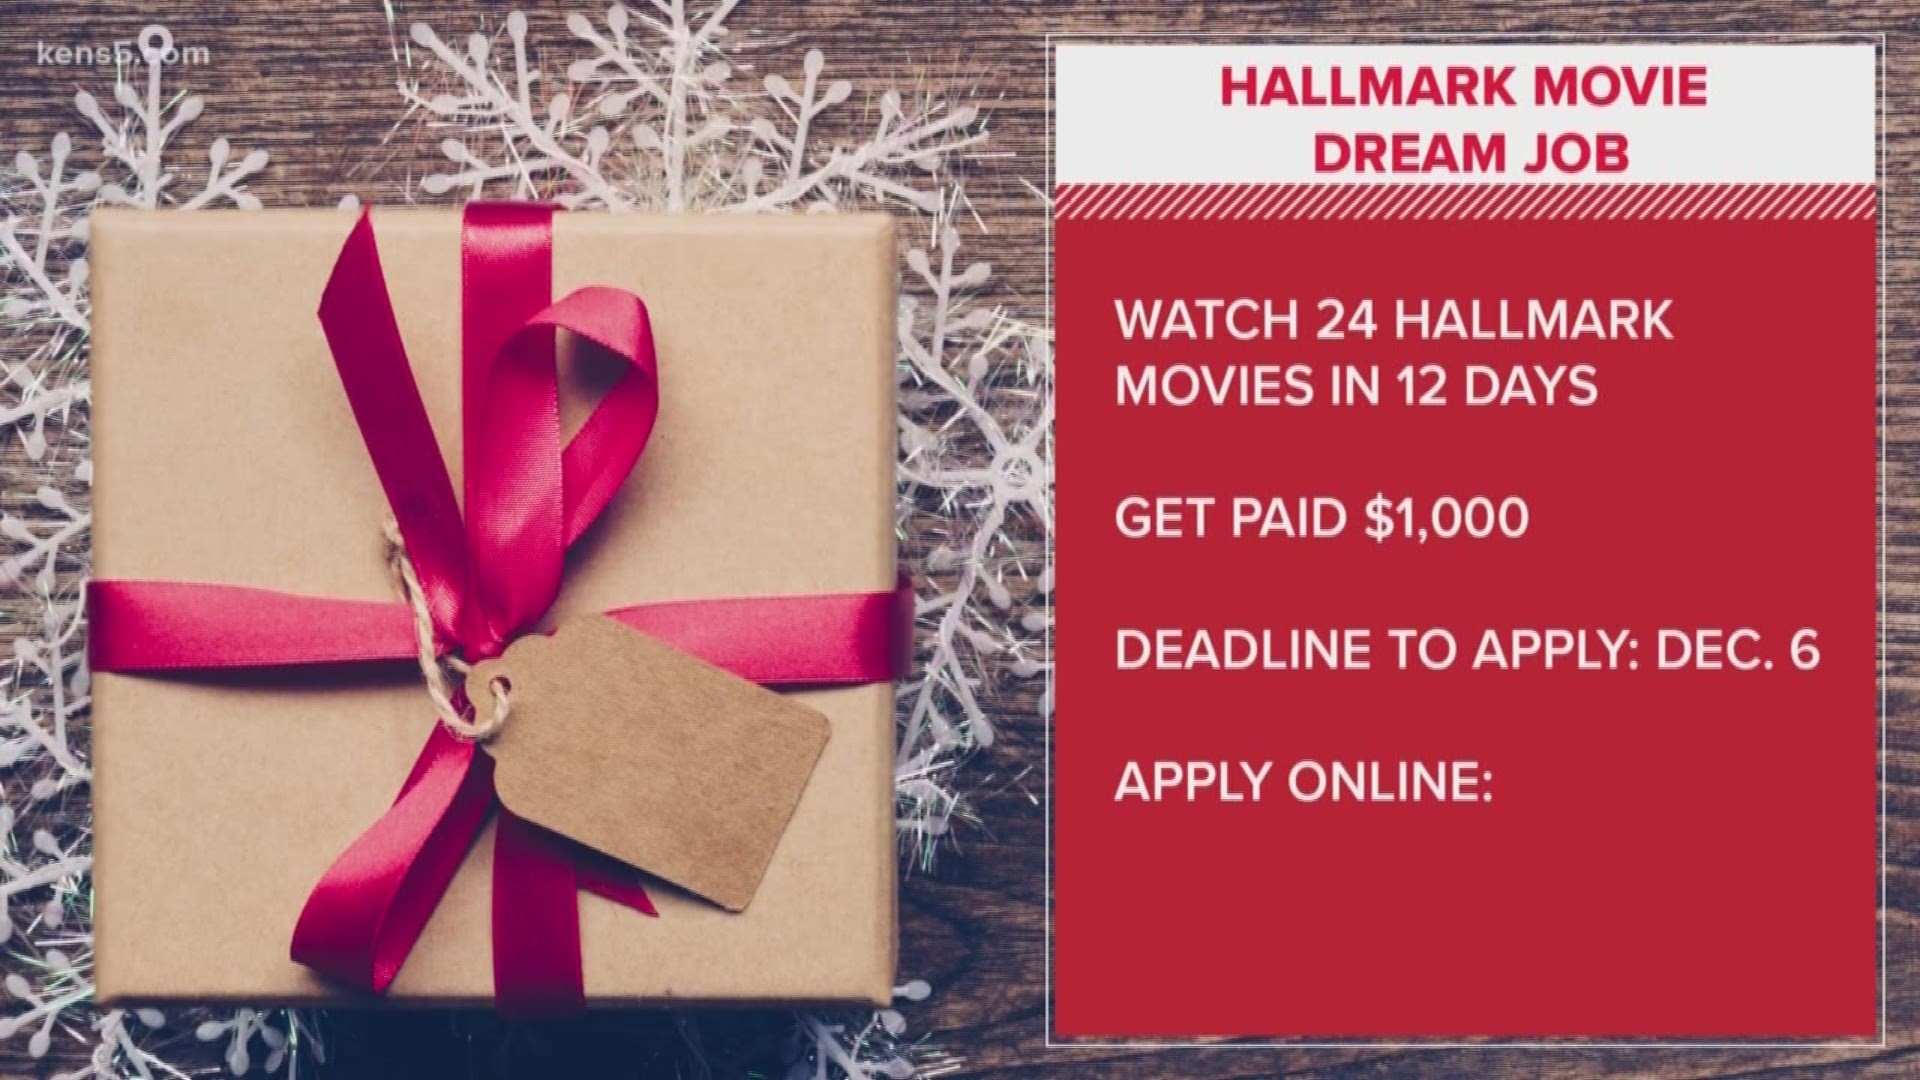 Do you want $1,000? Digital journalist Megan Ball shares how you can earn some cash by watching movies. And Santikos is opening its 10th theater, find out where.